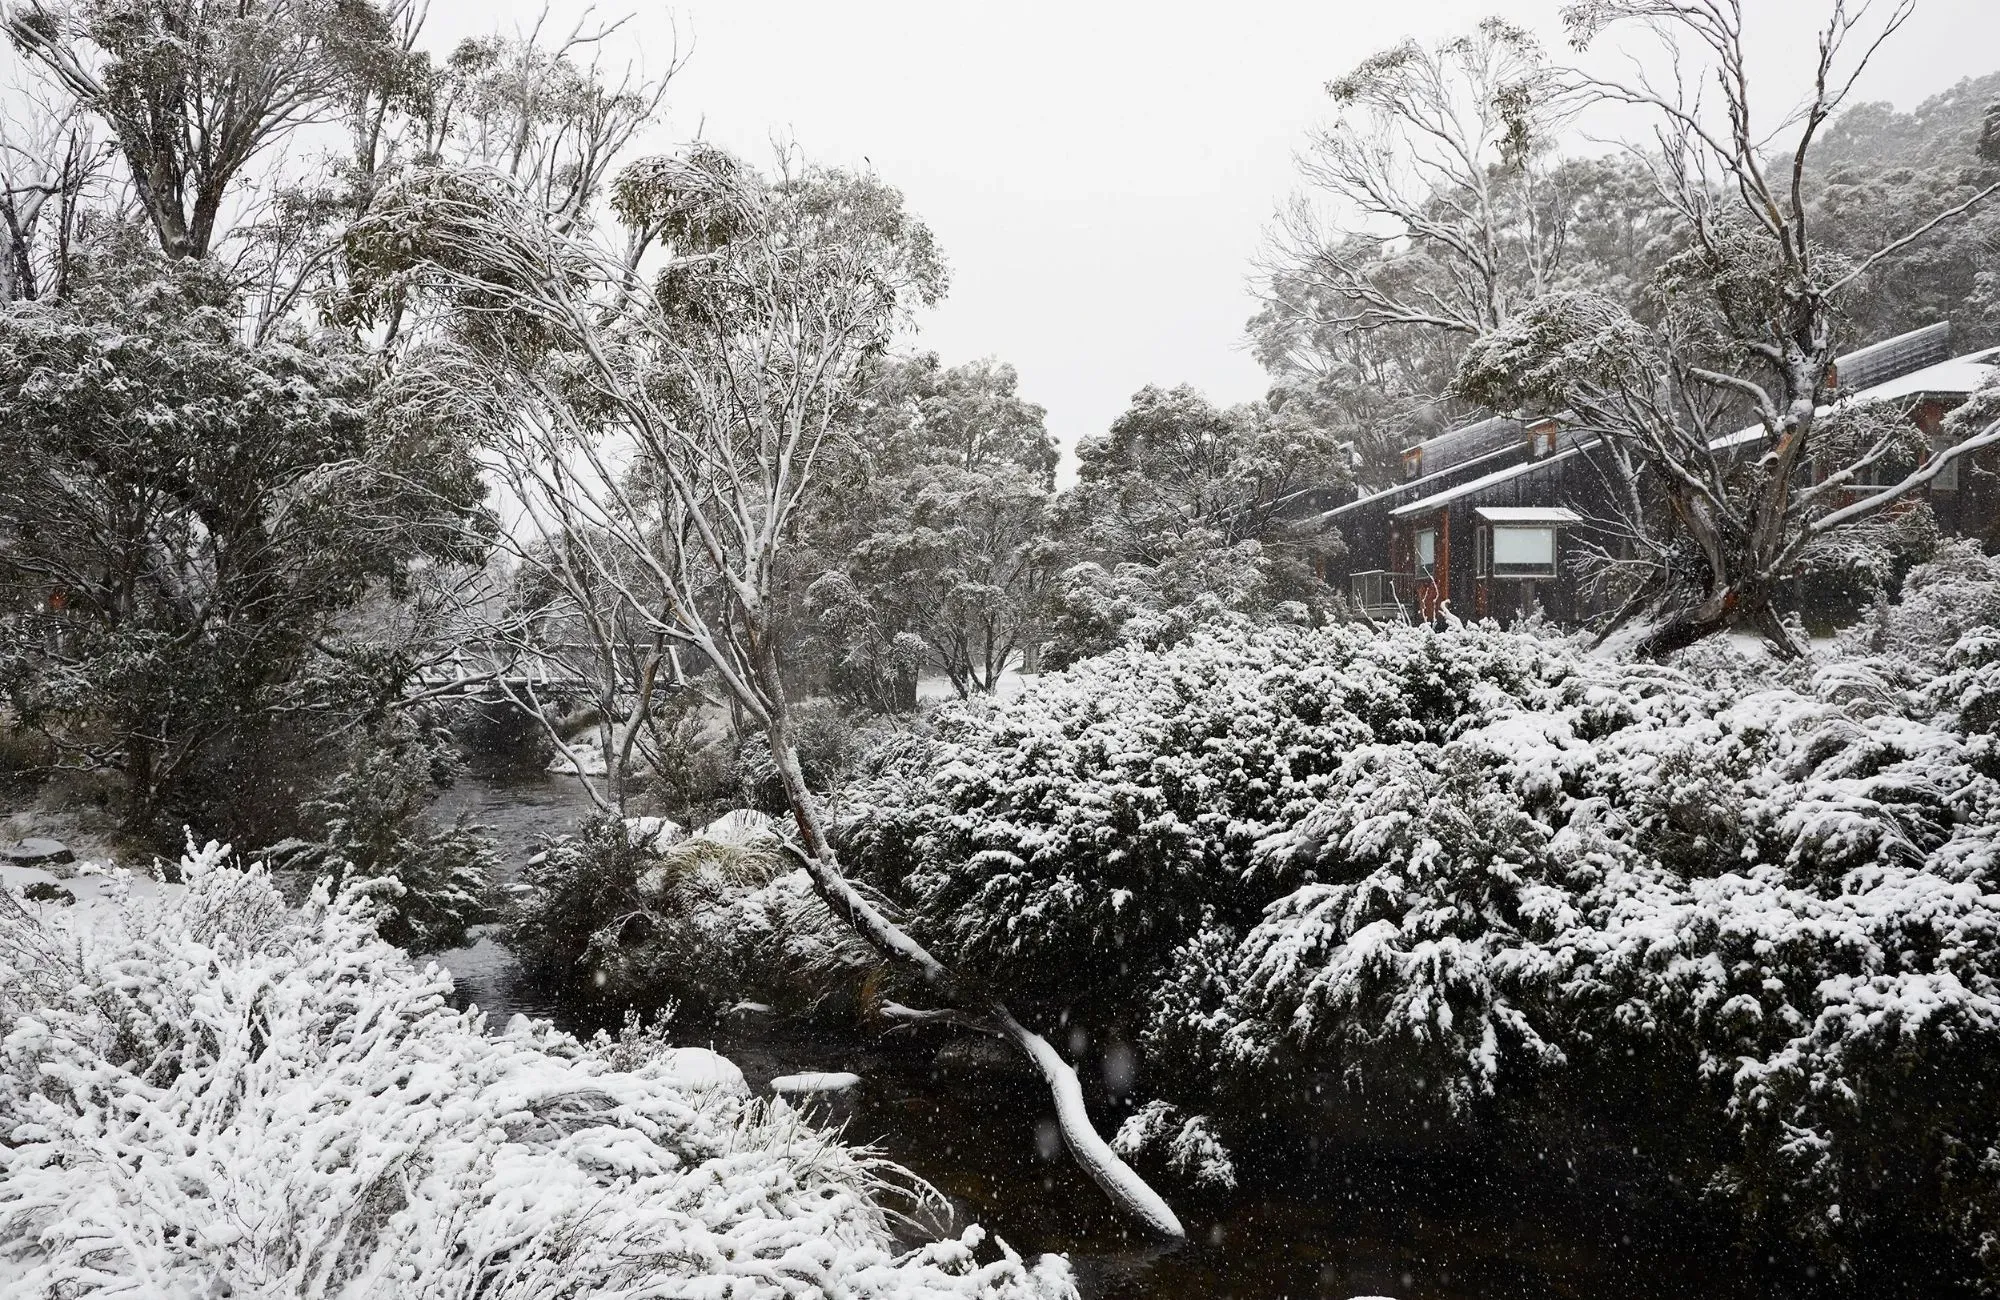 Cedar Cabin by Nicholas Gurney & Monique Easton. Thredbo winter landscape, trees and bushes blanketed in white snow.